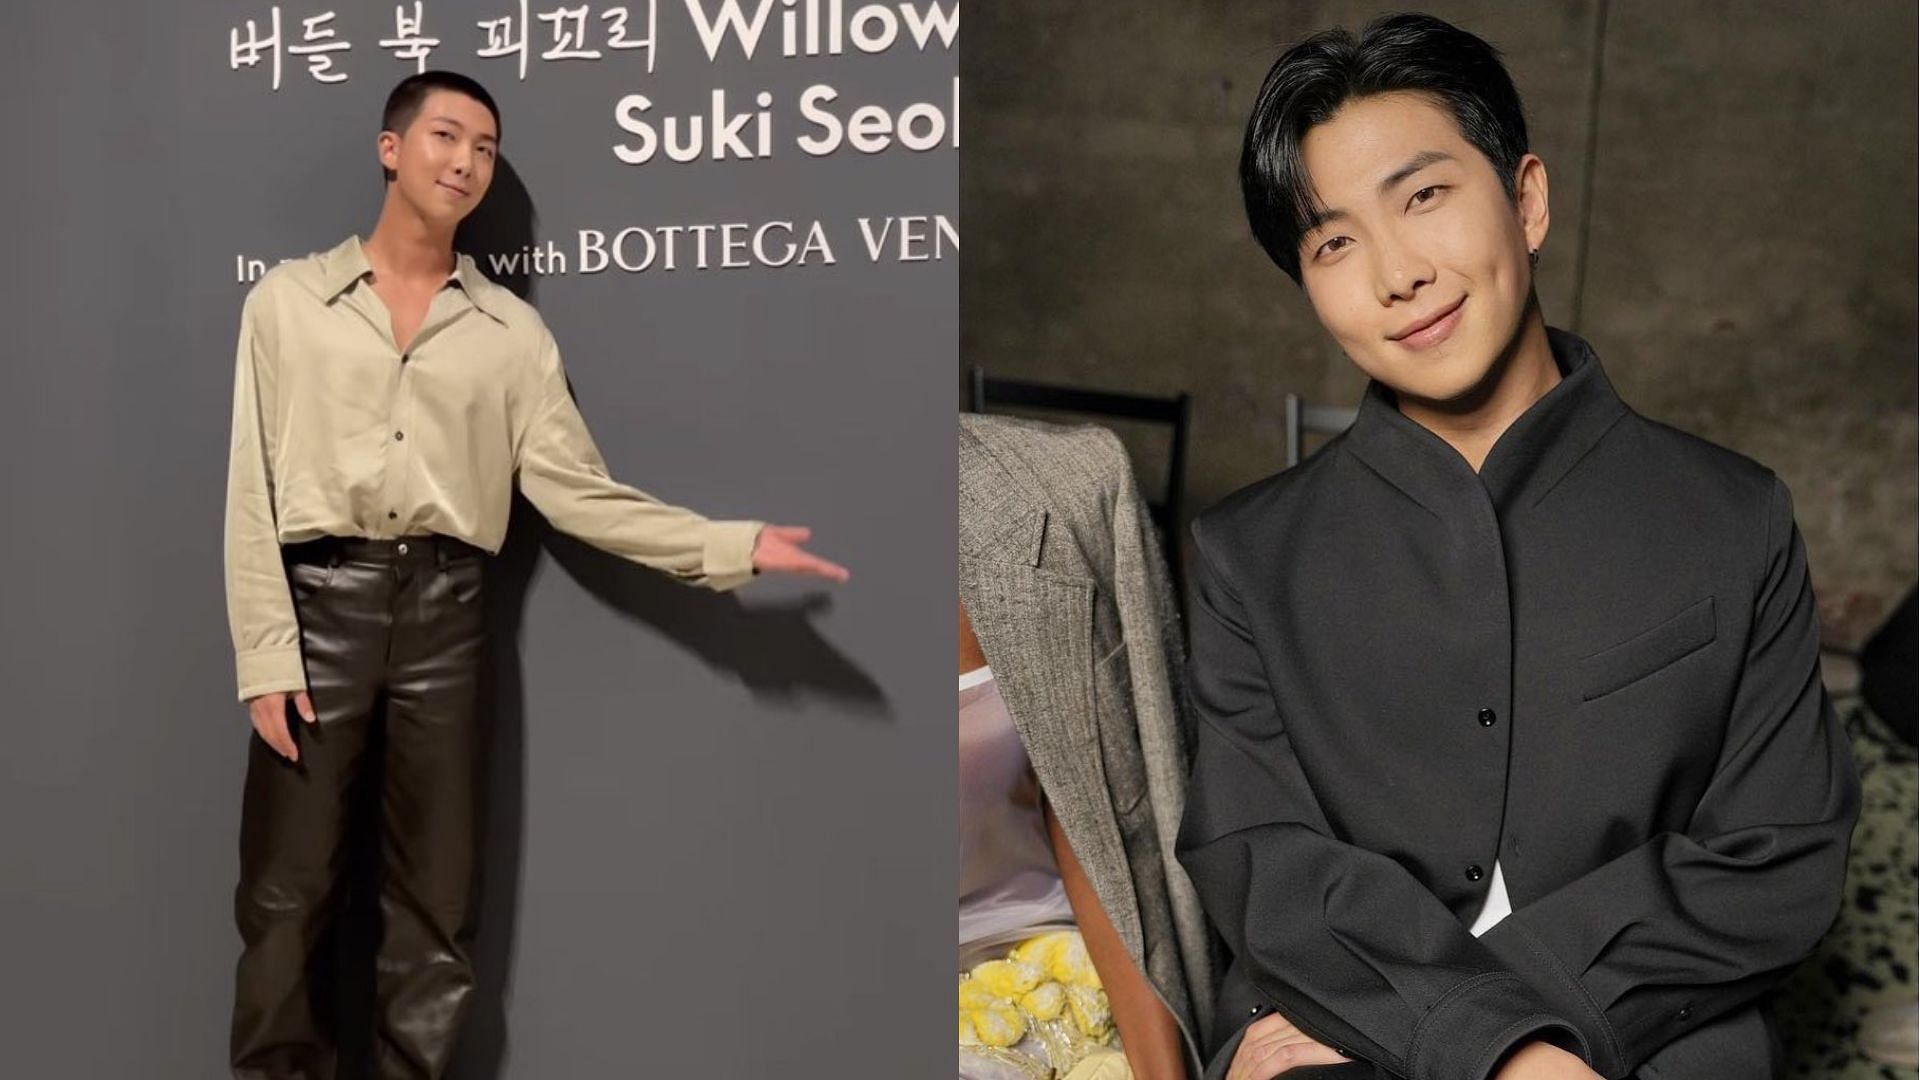 He is doing him”: Fans go gaga as BTS' RM as he attends a Bottega